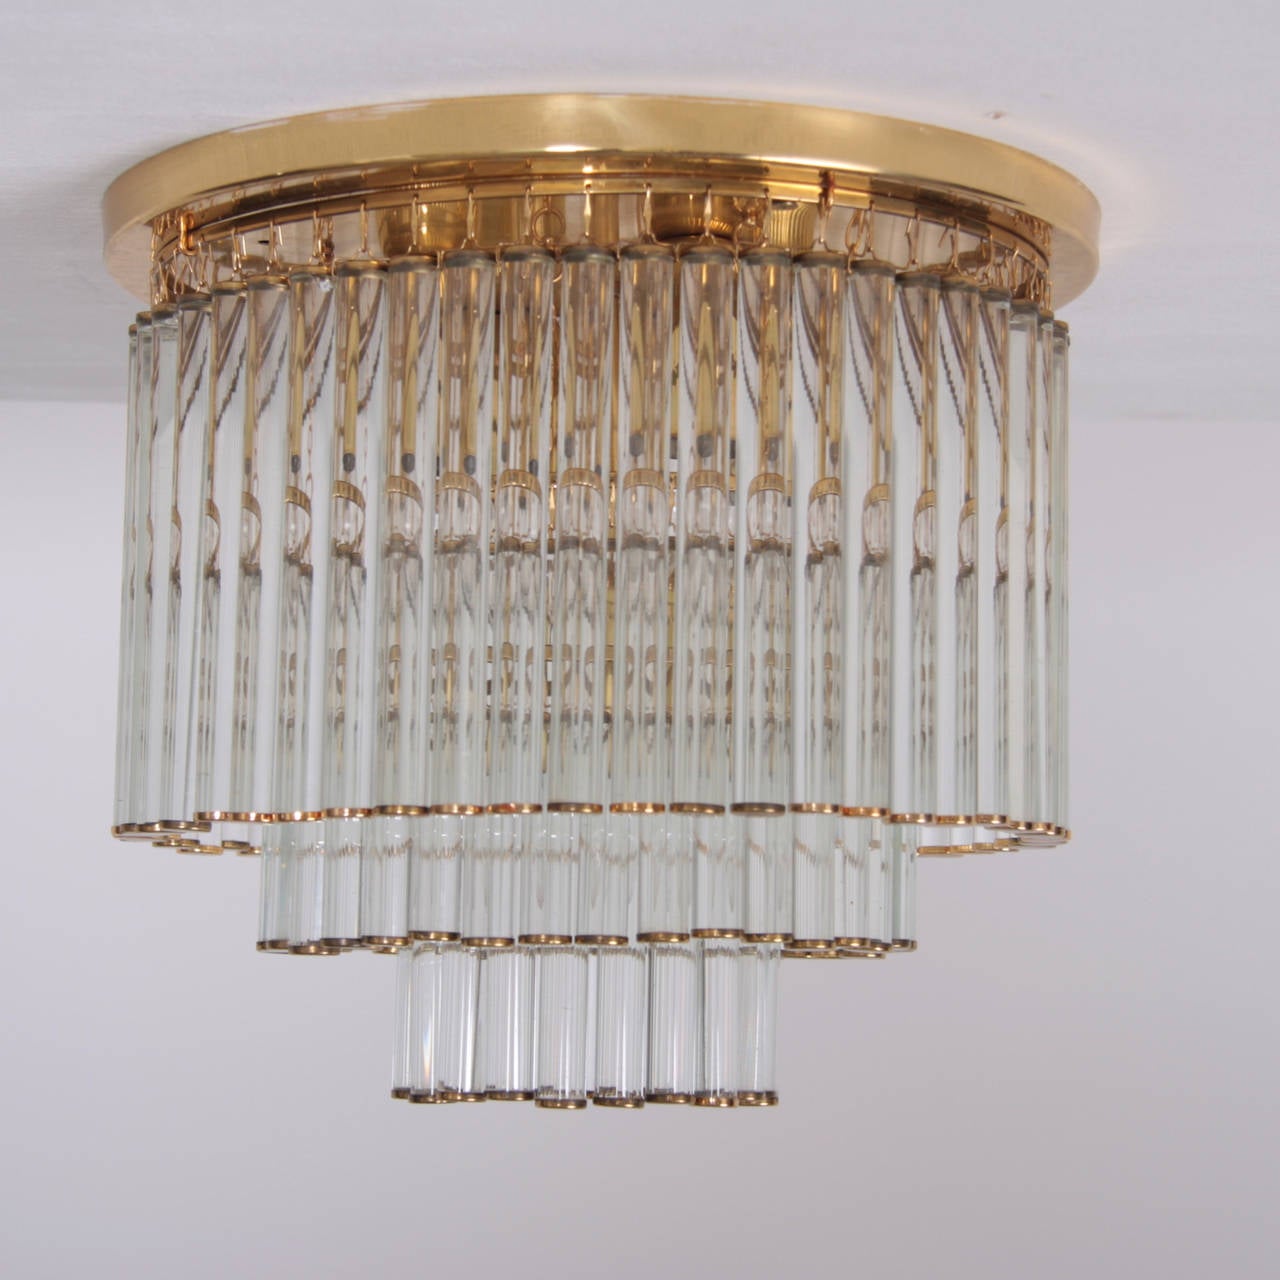 Mid-20th Century Glass and Brass Flush Mount Fixture by Ernst Palme in the Manner of Venini For Sale